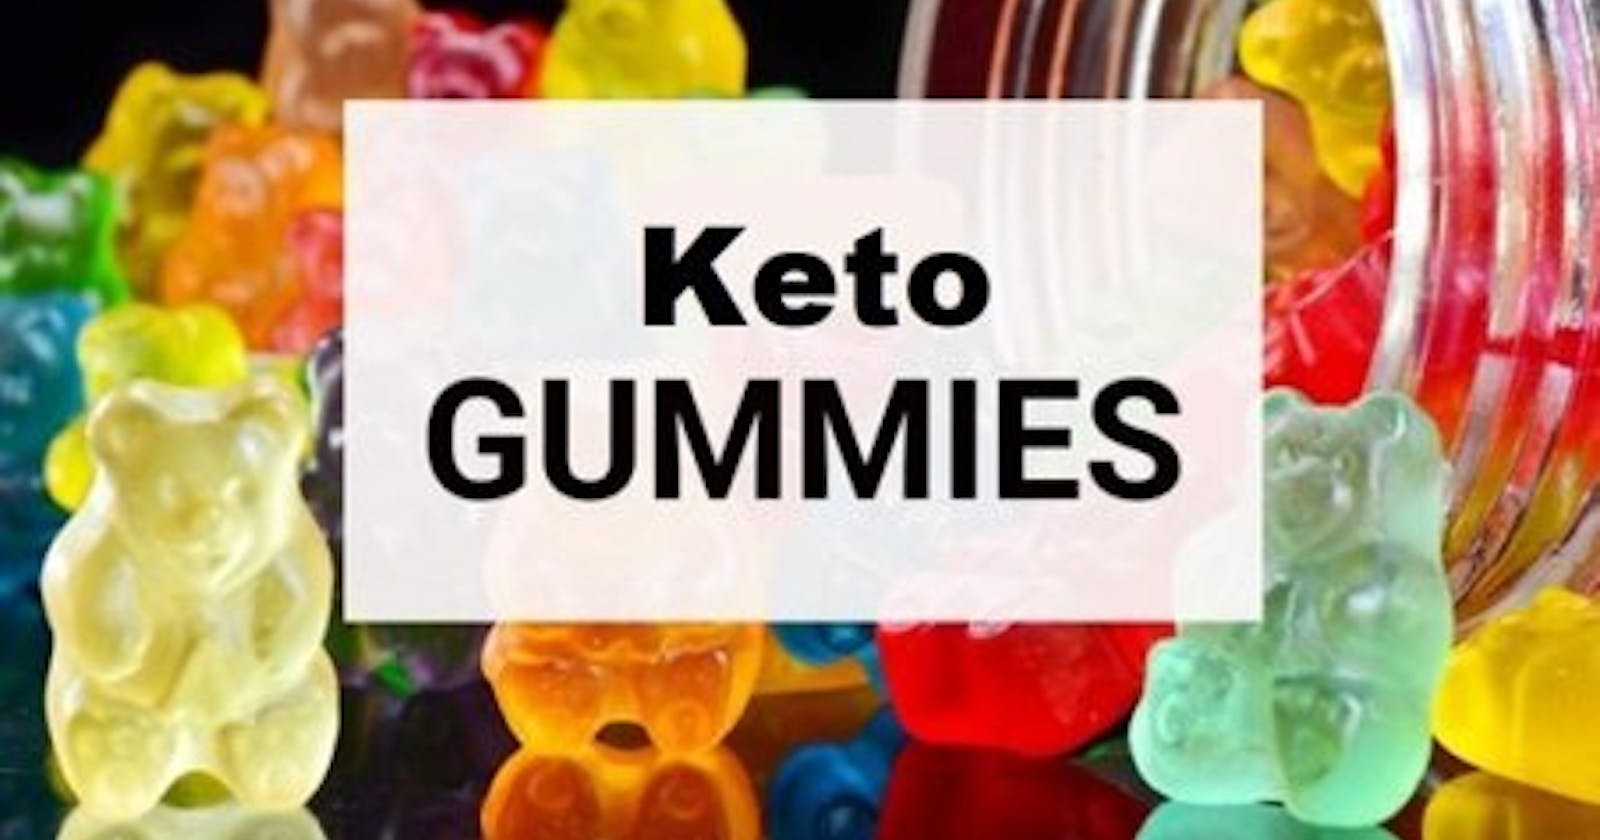 Pro Keto ACV Gummies Canada Reviews: WEIGHT LOSS PILL DANGERS OR IS IT LEGIT ! SHOCKING USER COMPLAINTS What to Know Before Buying These Pills?